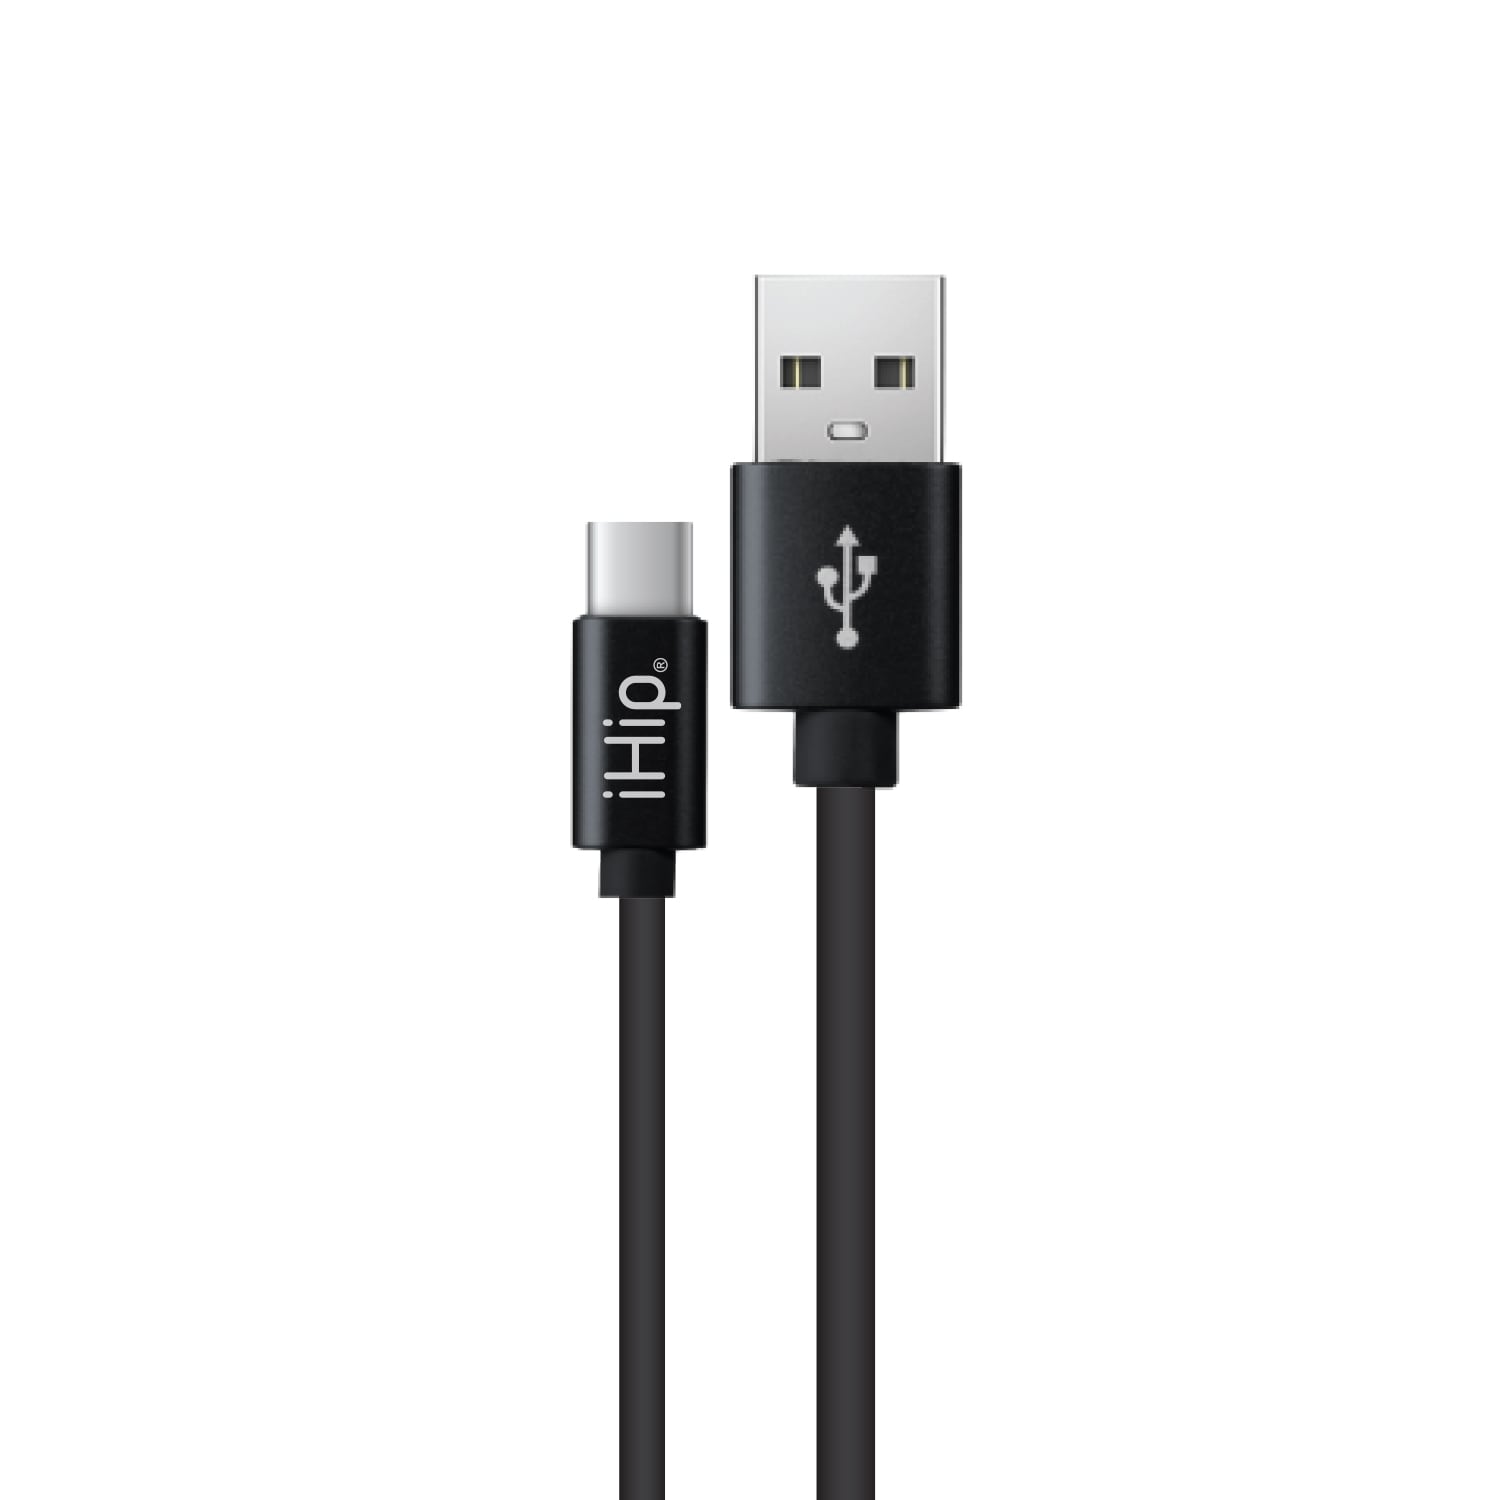 S10e Naztech Elite Series USB-C High-Speed Charge & Sync 4ft Cable Compatible for Samsung Galaxy S20 Note 10 Note 9 Note 8 S8 S8+ S9+ Gold S10 Google Pixel & More S10+ S9 